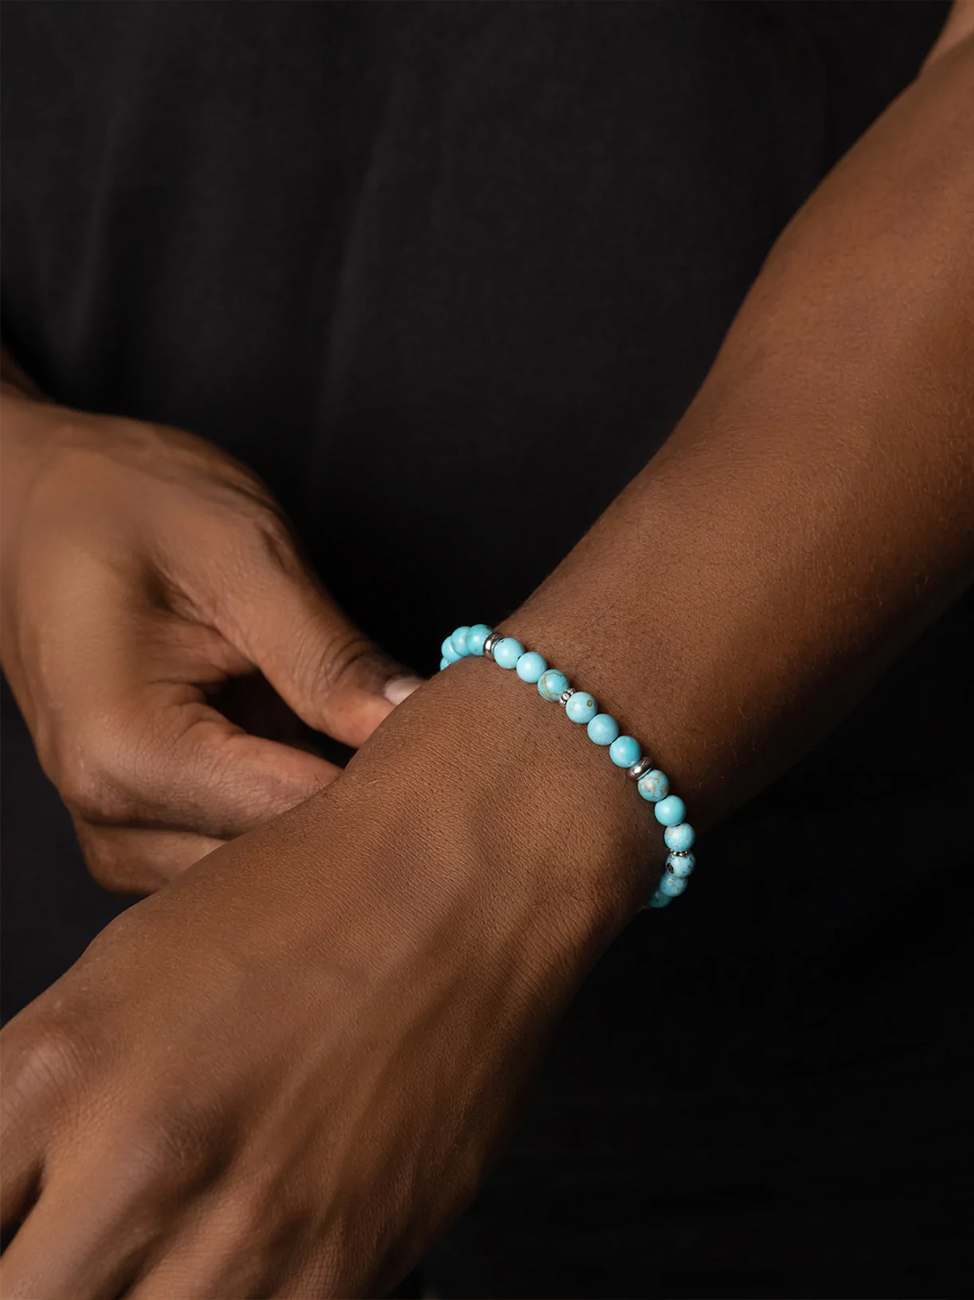 Nialaya Men's Beaded Bracelet with Turquoise and Silver | MSB8_064